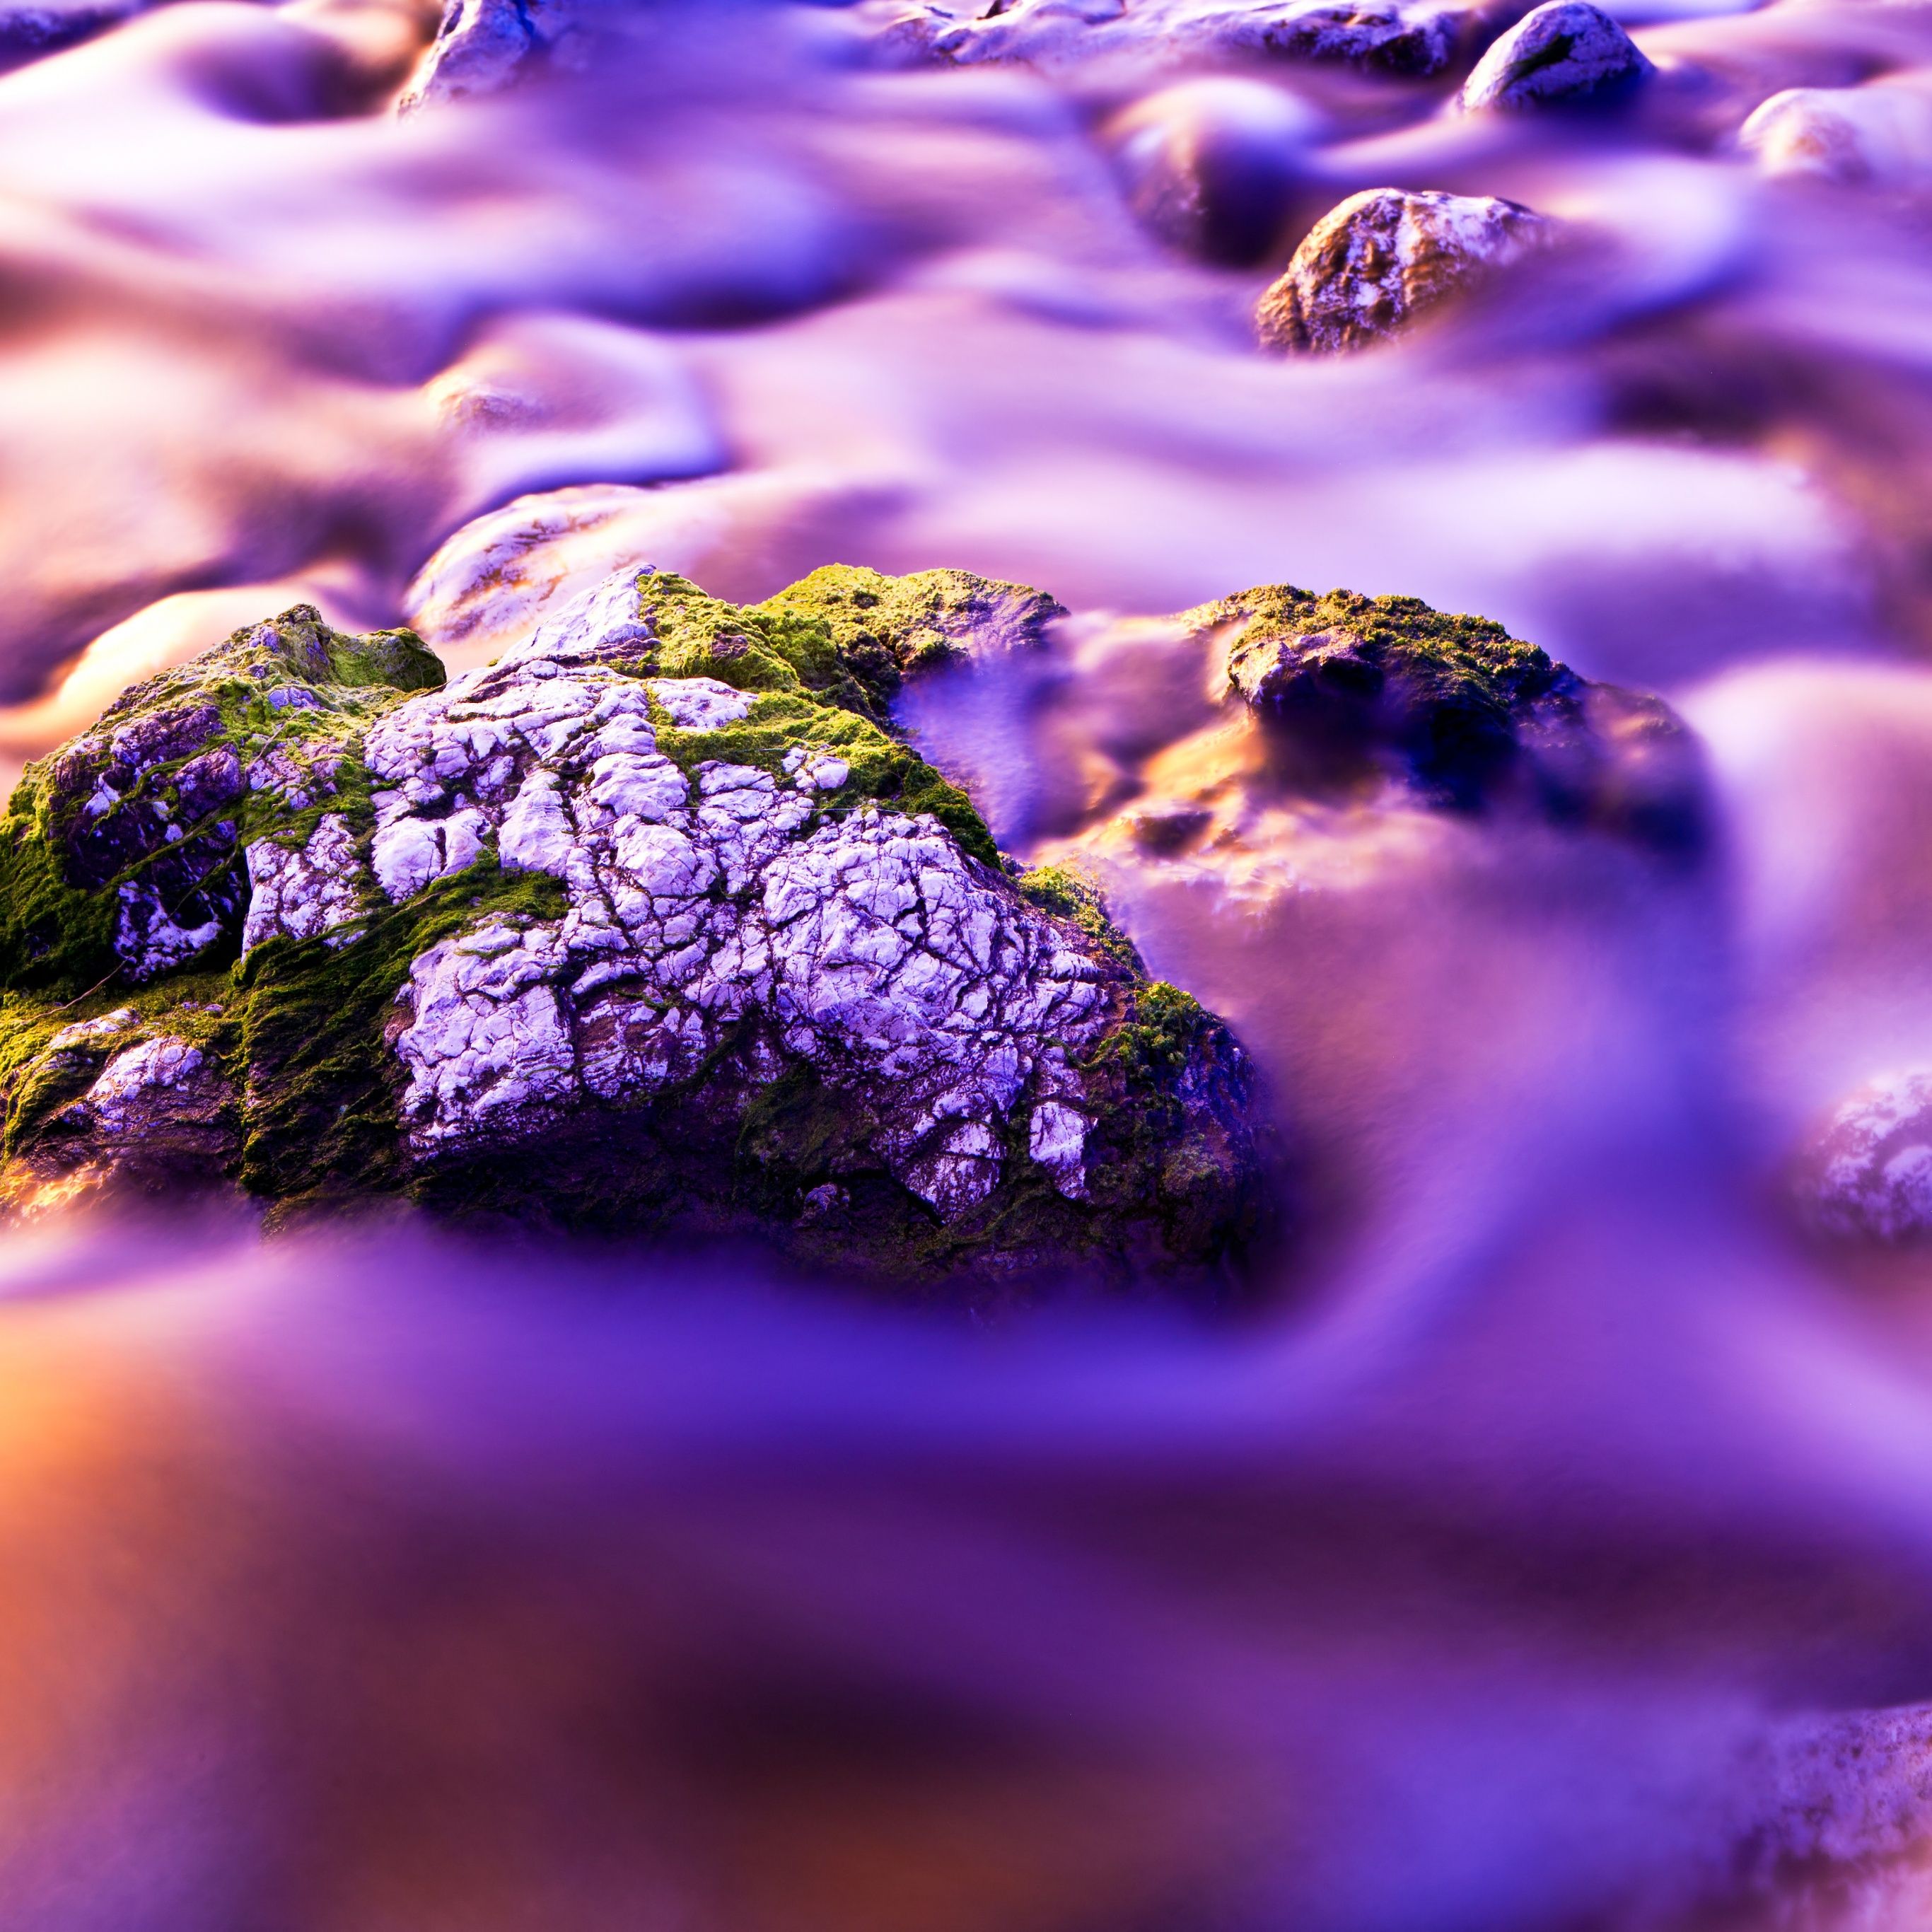 A river flowing over rocks, with a purple hue. - Water, rocks